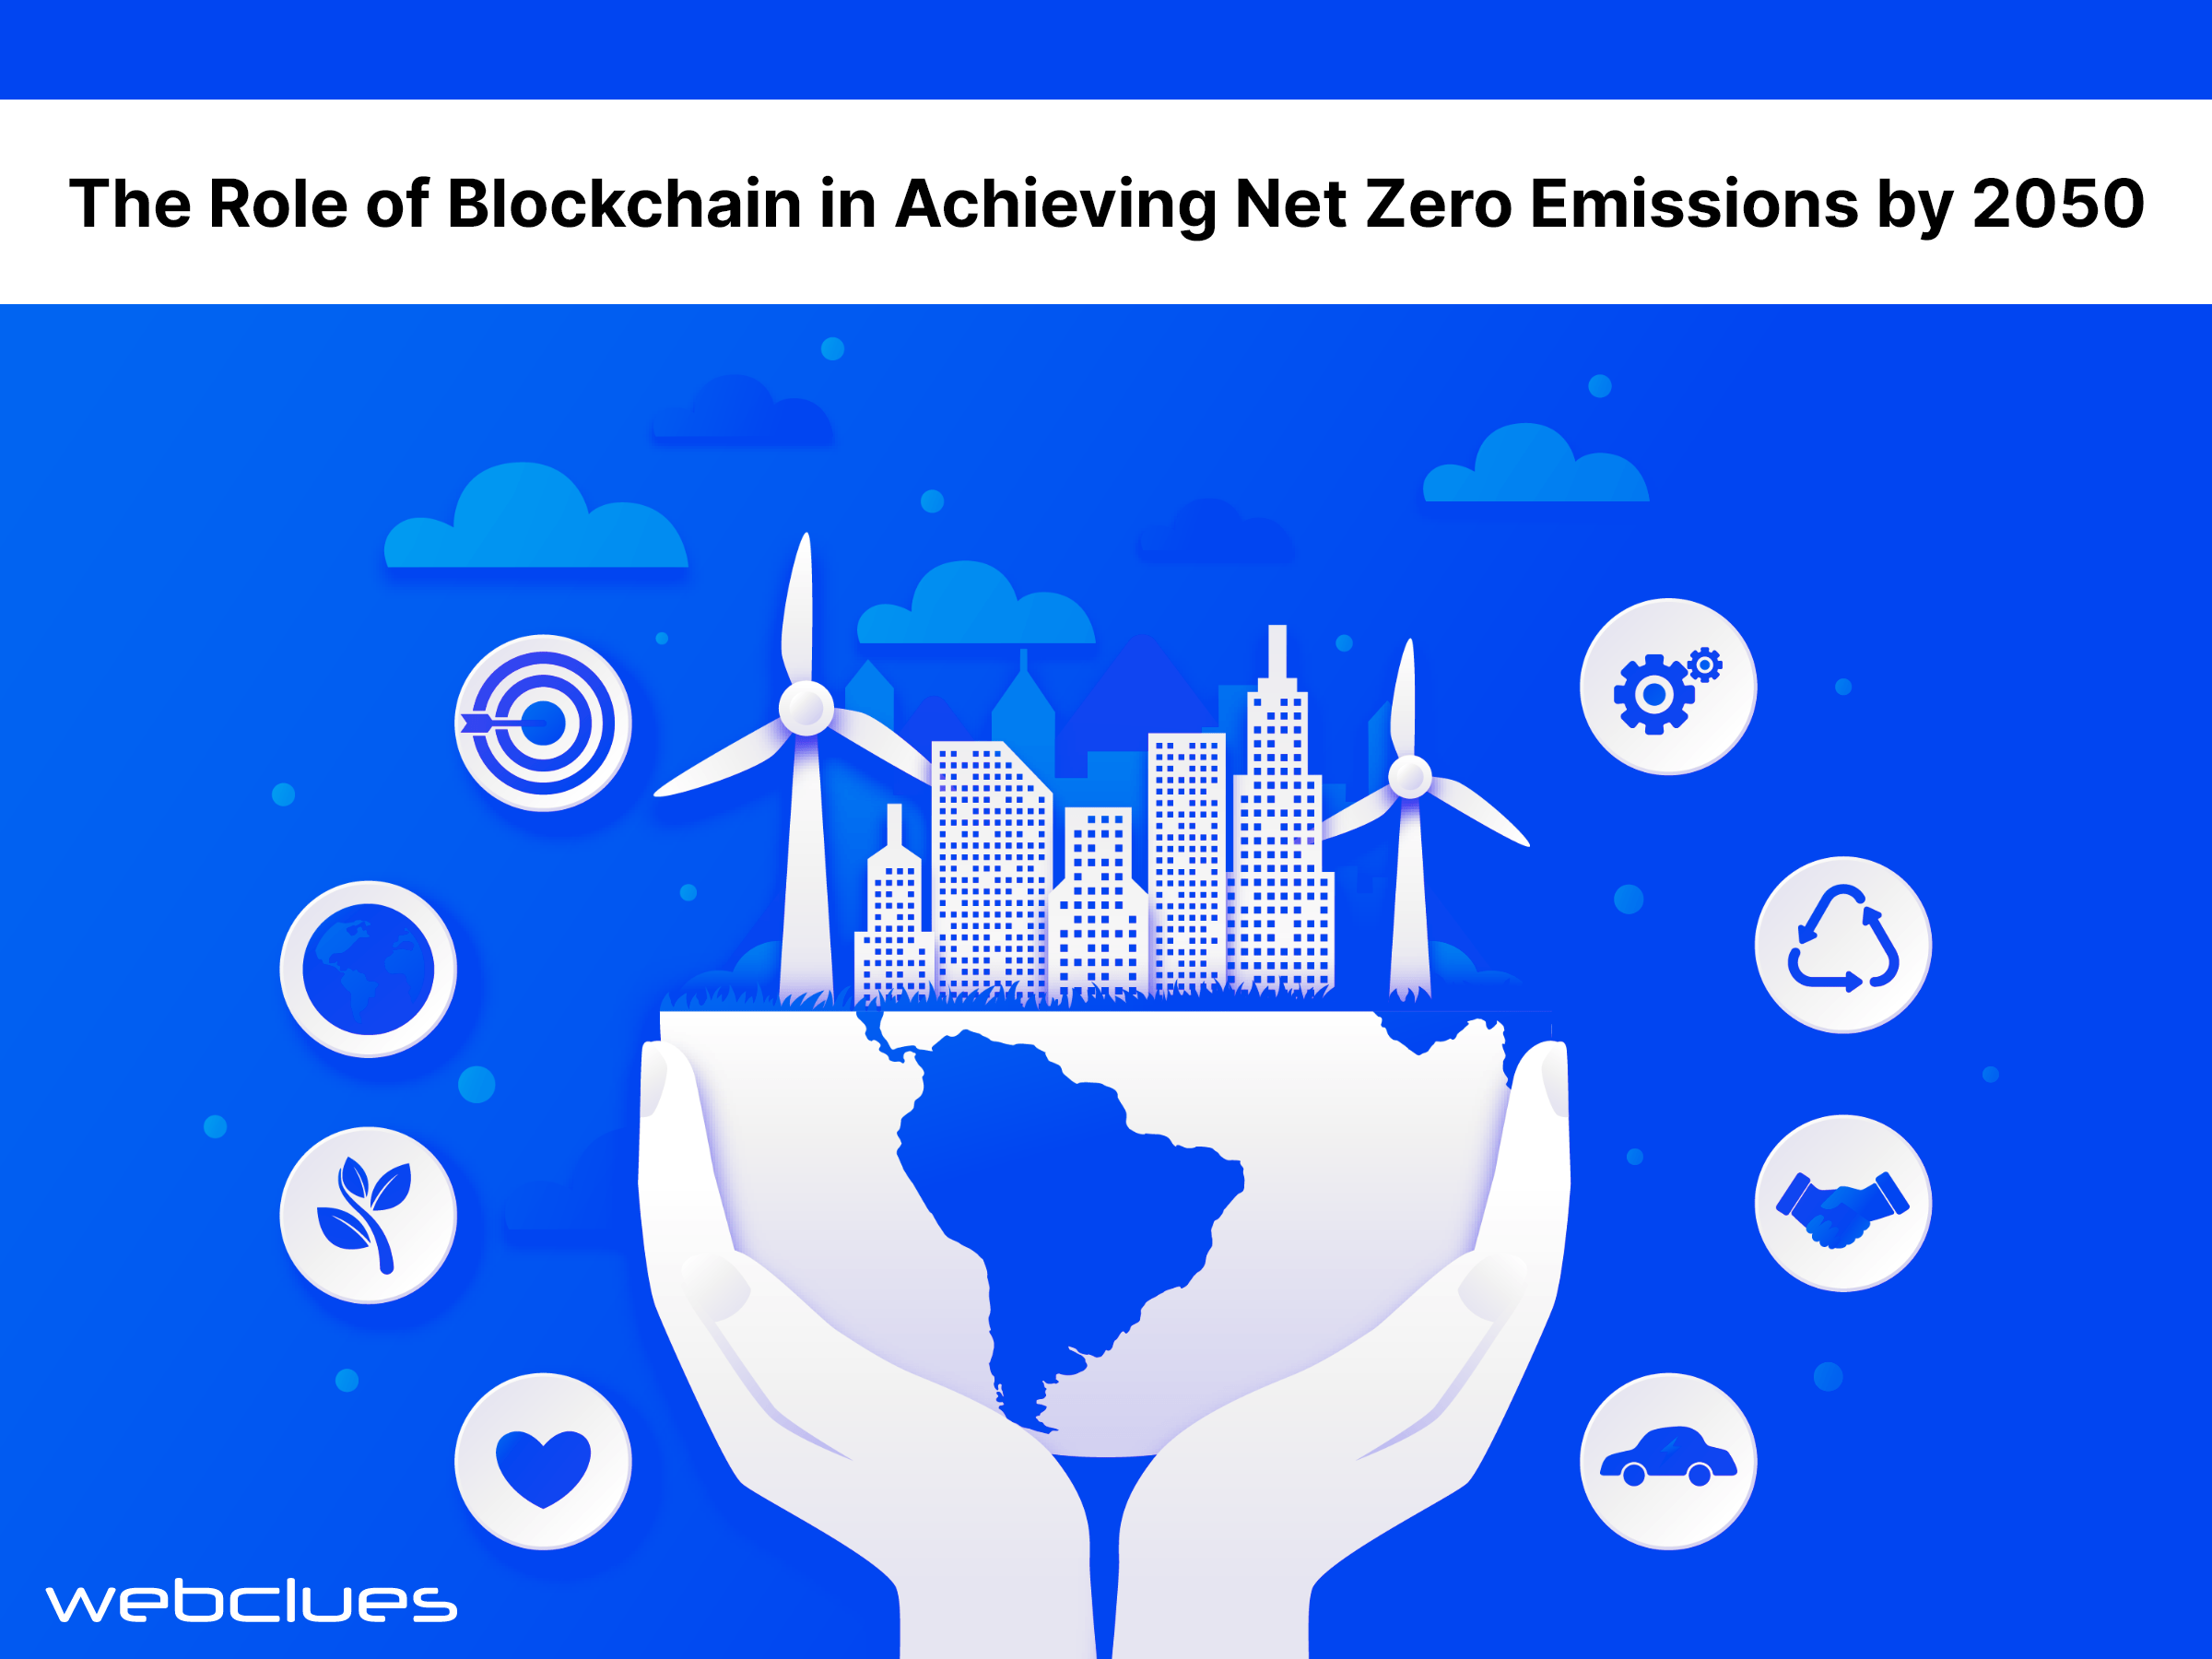 The Role of Blockchain in Achieving Net Zero Emissions by 2050